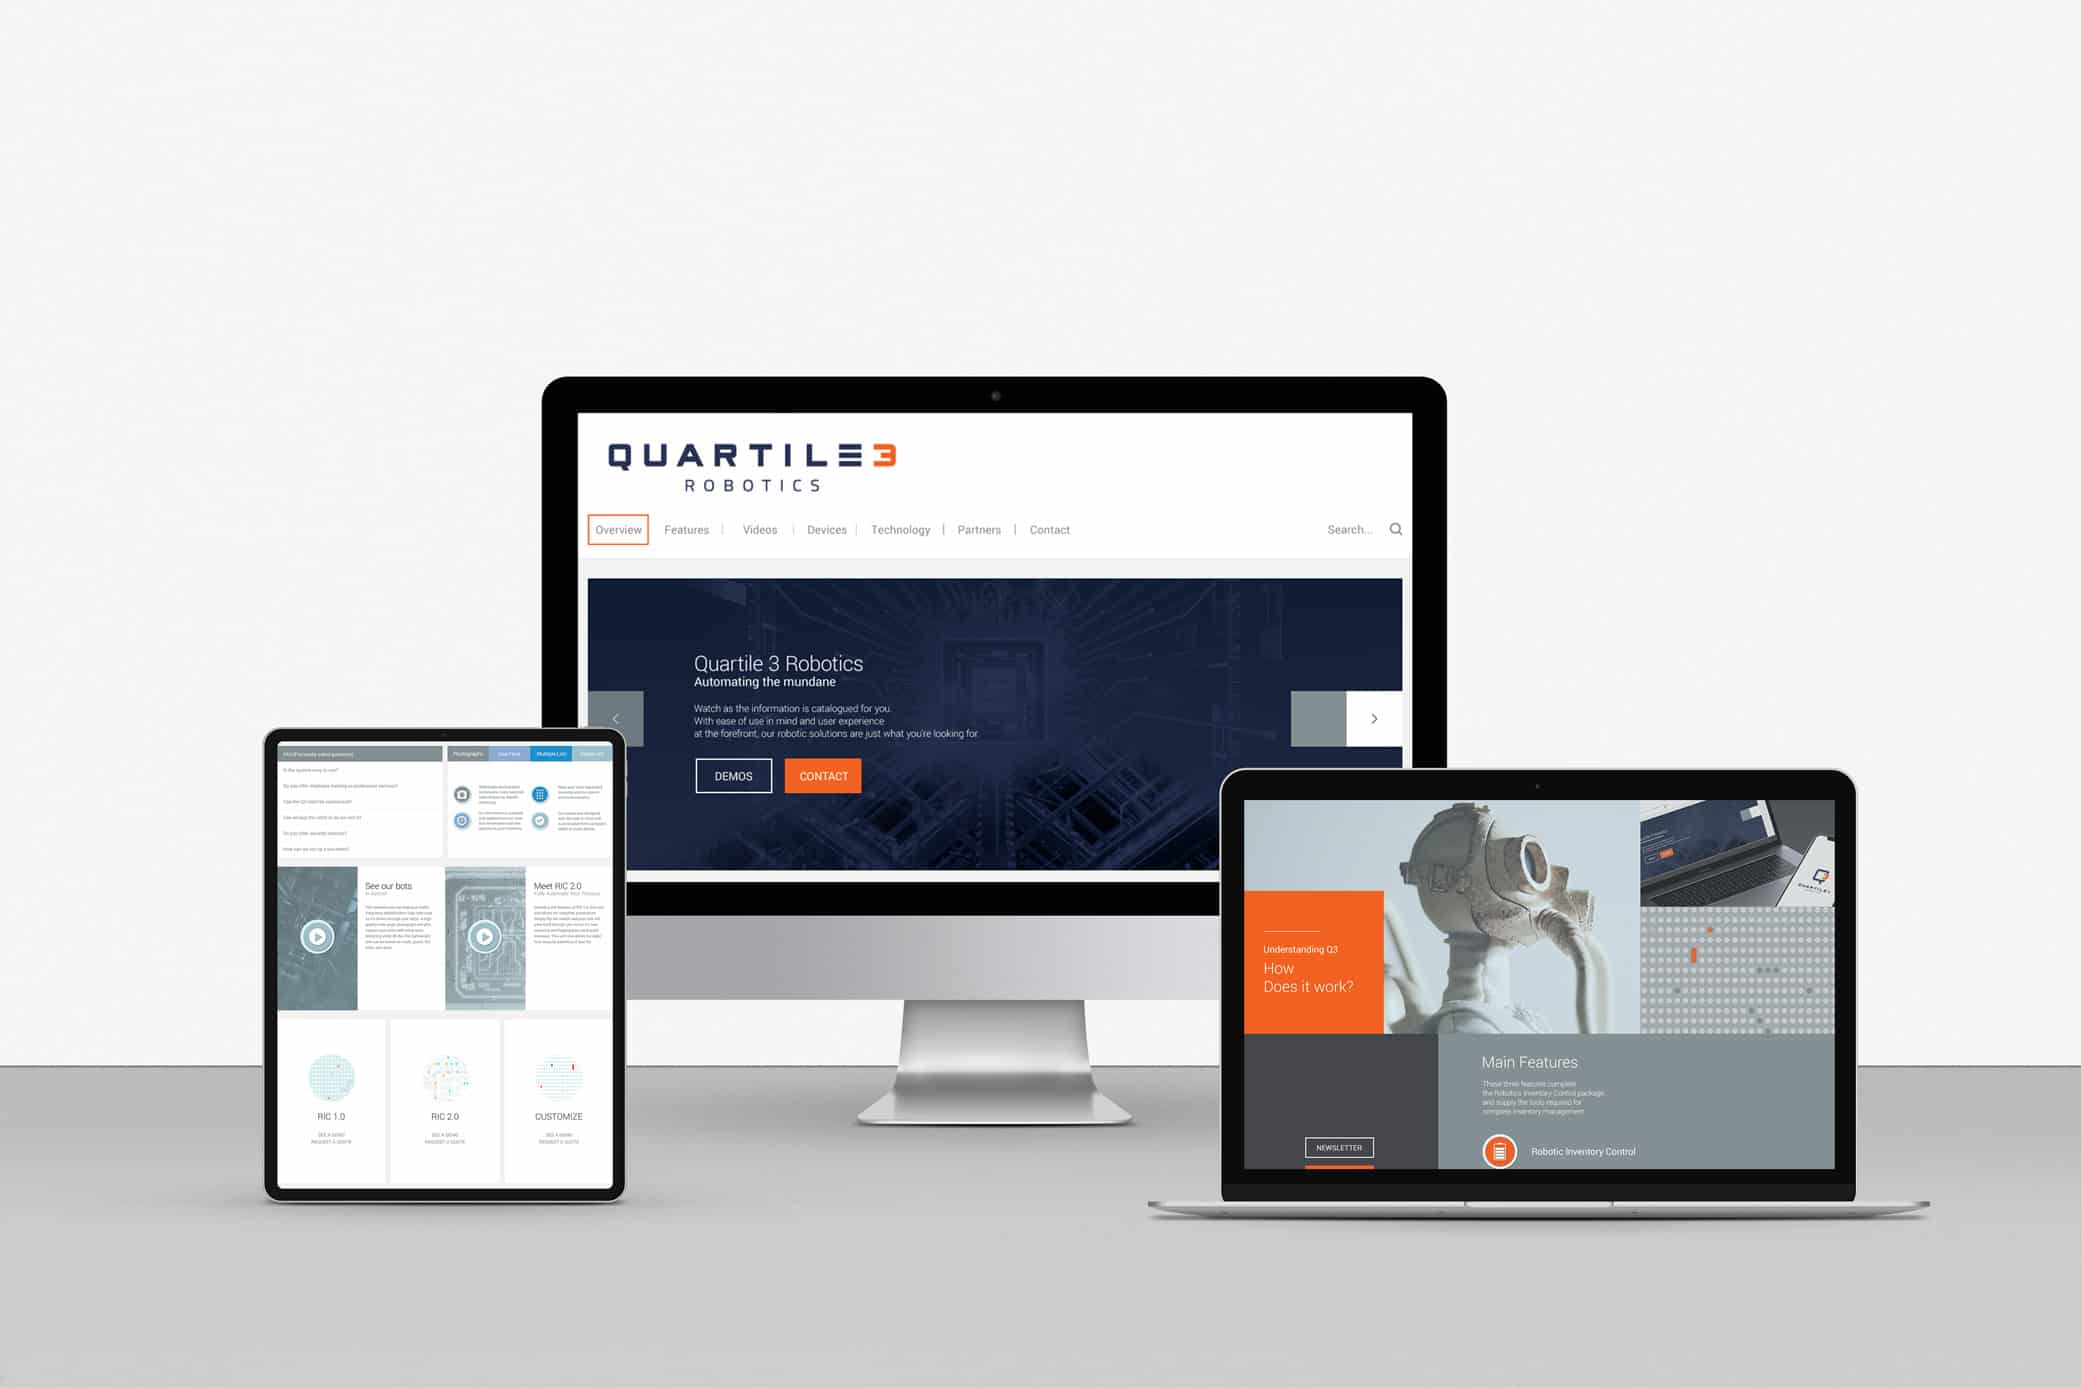 Quartile 3 Robotics technology company web design aligning with the tech-focus of the brand, incorporating sleek images of circuits, droids, and computers.